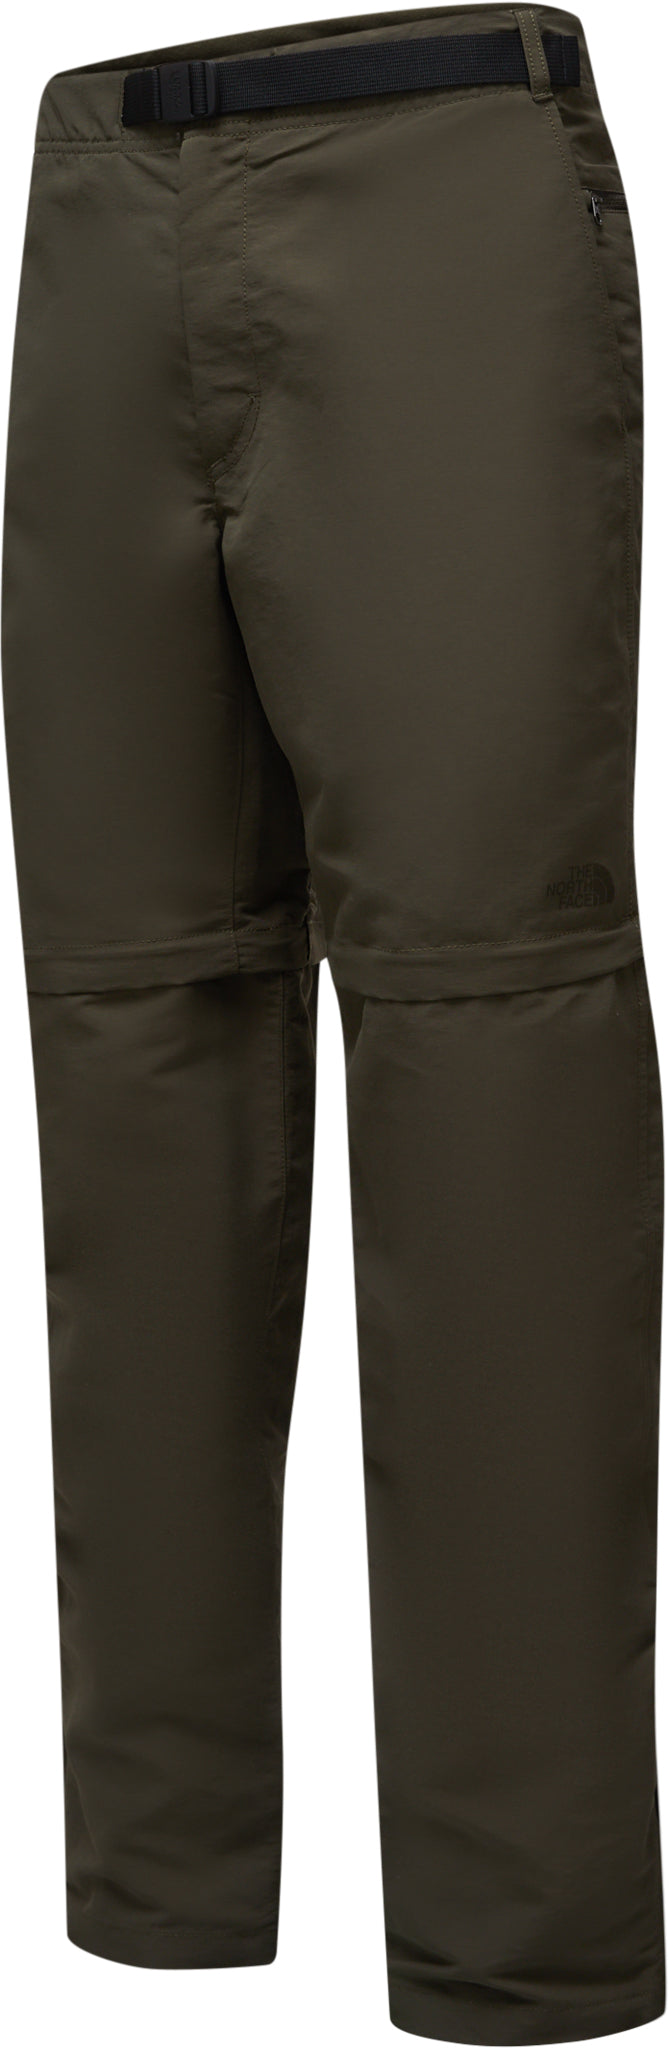 Hiking Pants] - Mens - The North Face (Utility Brown, Zip-Off, Paramount  Pro Convertible)